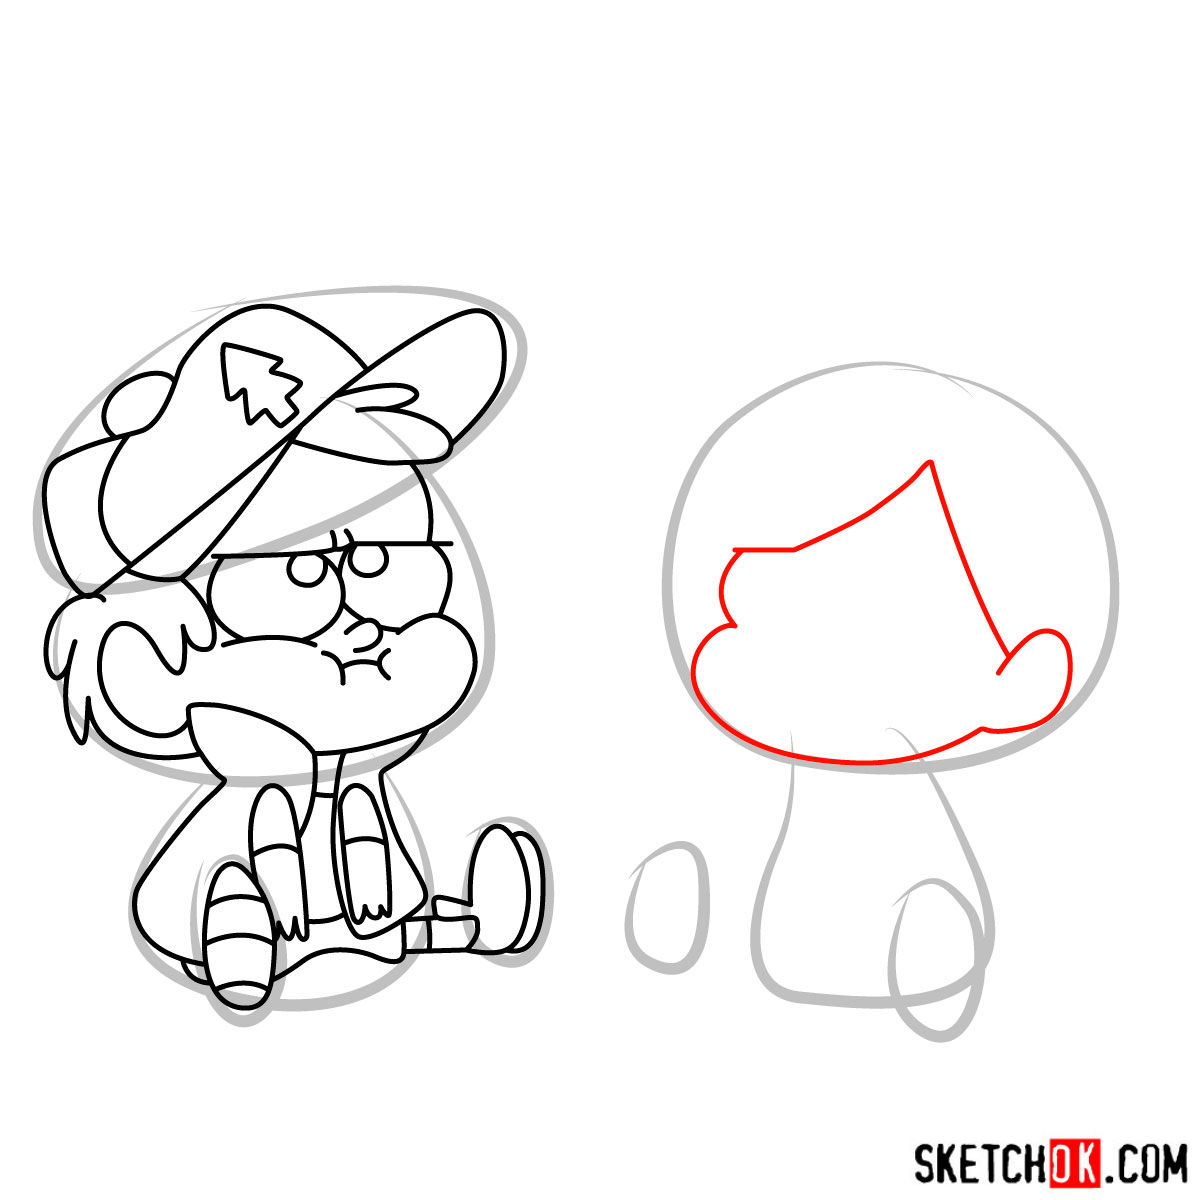 How to draw Dipper and Mabel Pines chibi style - step 09